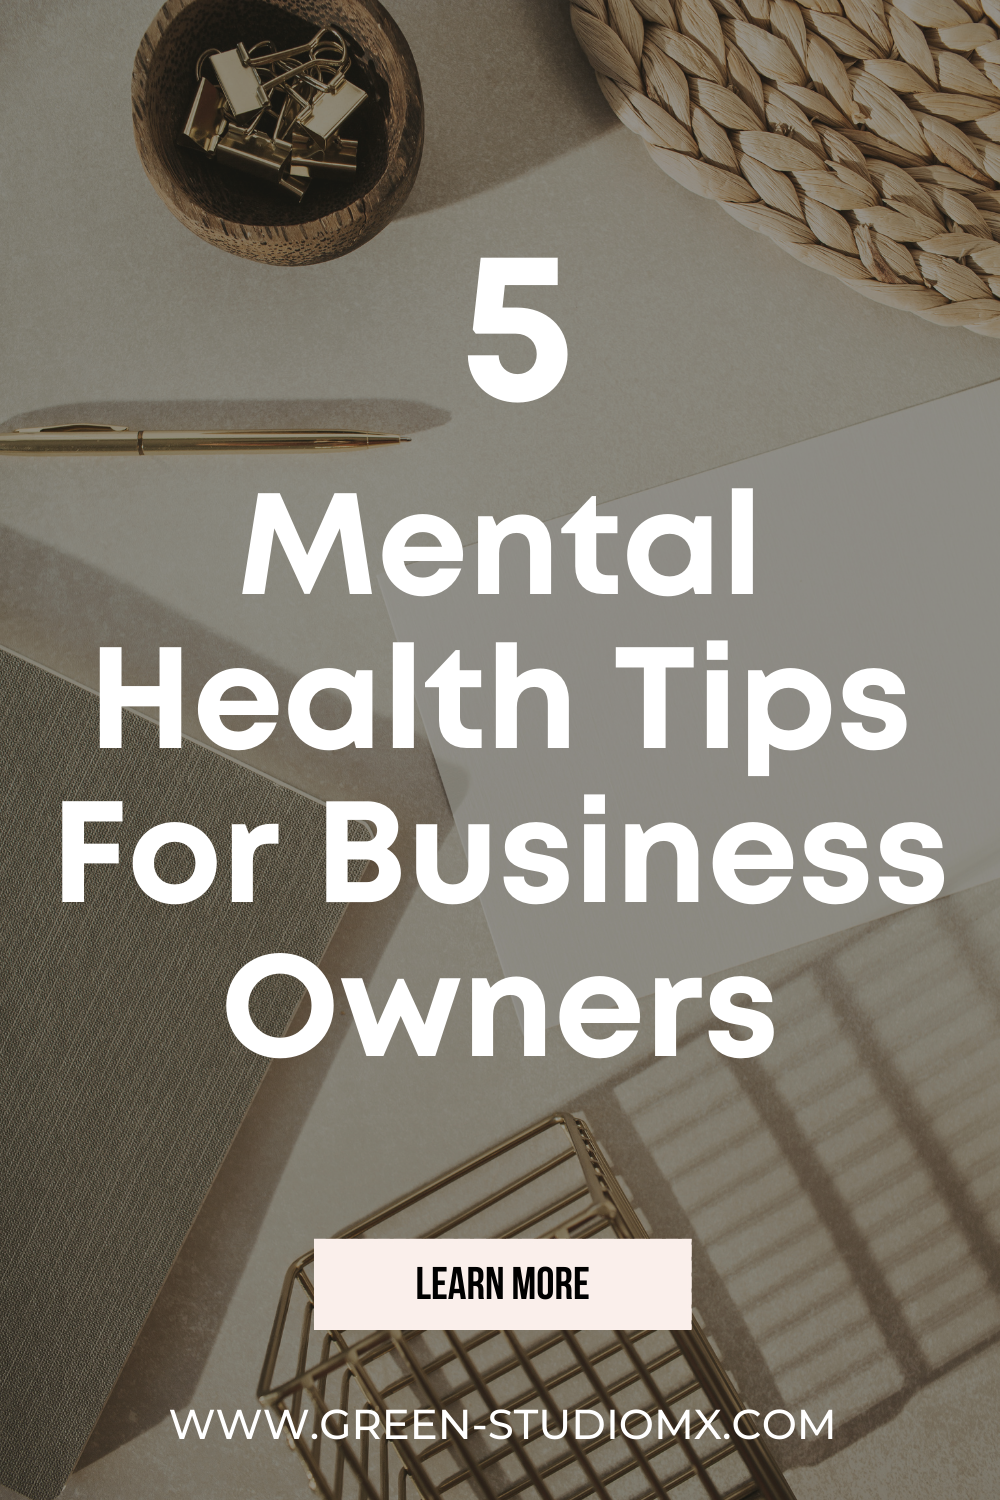 5 Mental Health Tips For Business Owners